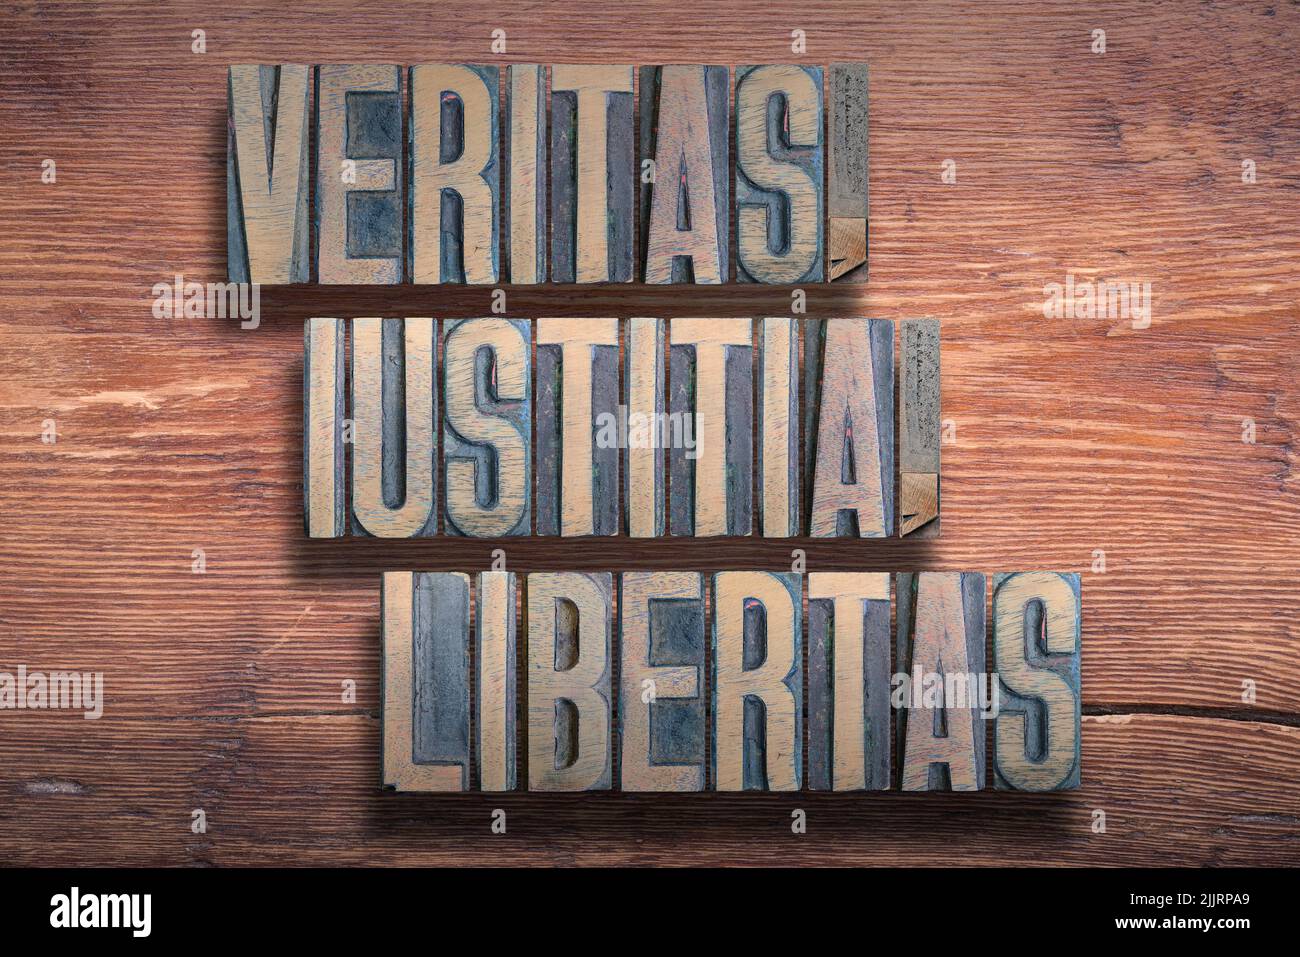 veritas, iustitia, libertas ancient Latin saying meaning - truth, justice, liberty, combined on vintage varnished wooden surface Stock Photo